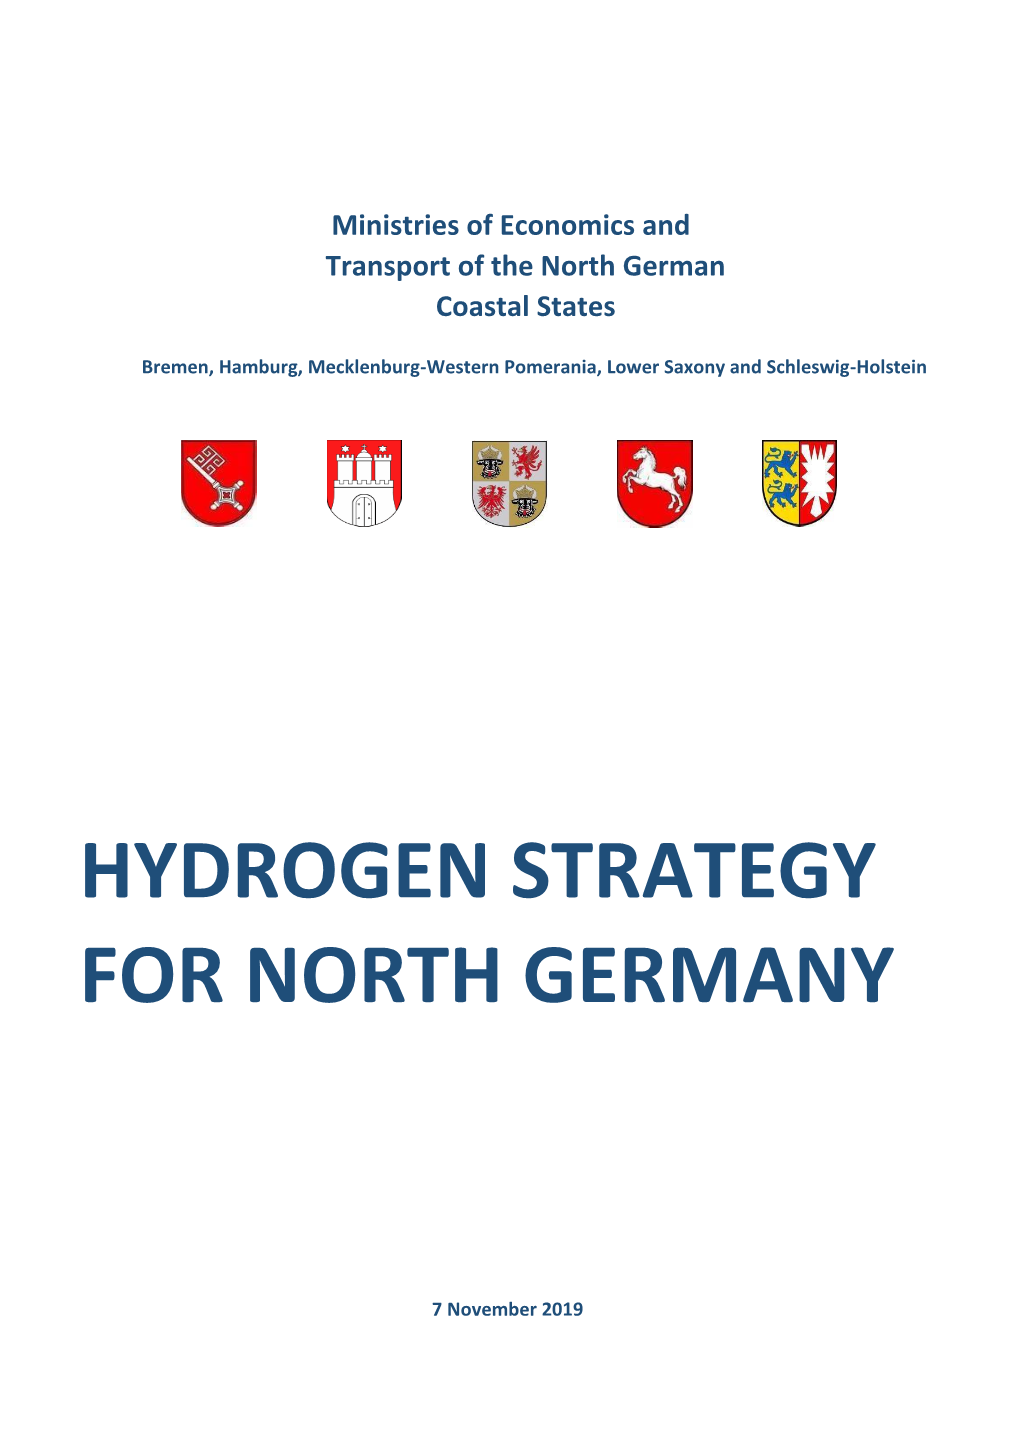 Hydrogen Strategy for North Germany